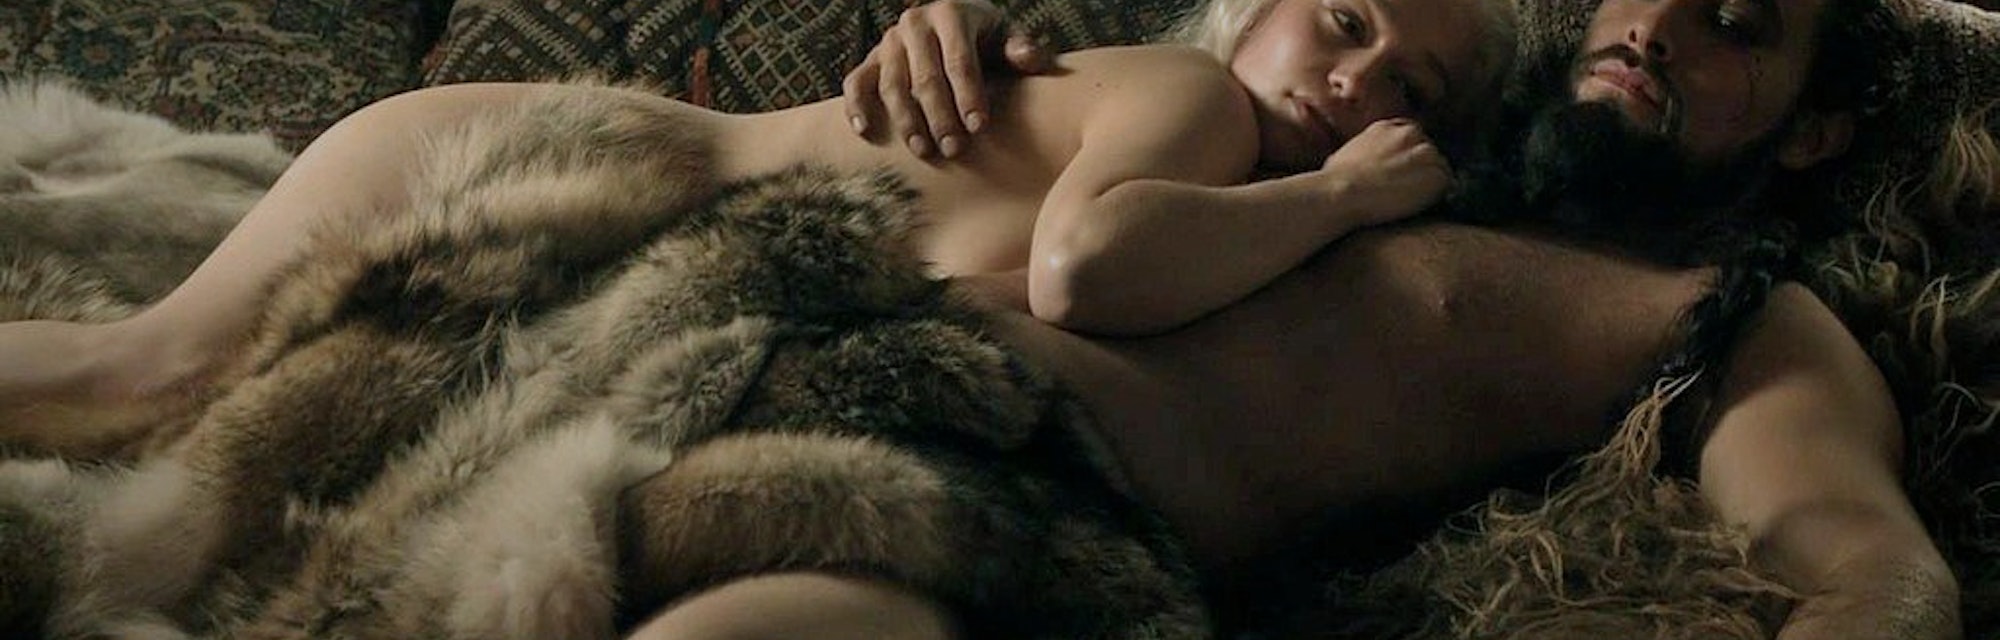 Of thrones porn game Meet the